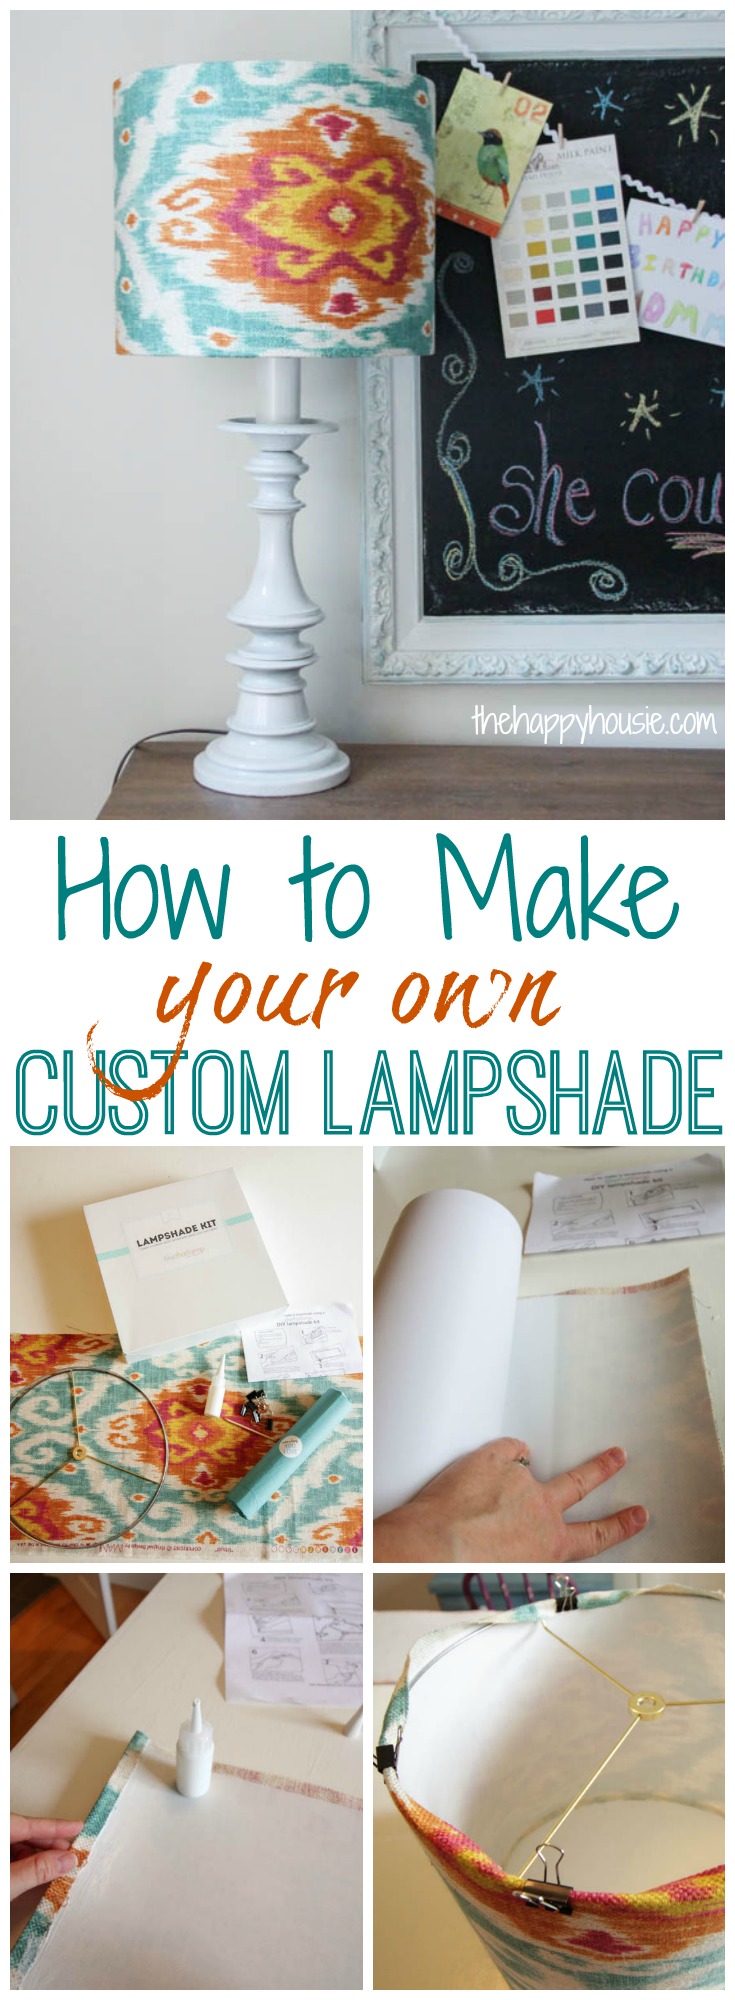 How to make your own custom lampshade tutorial using I love that lamp kit at thehappyhousie.com